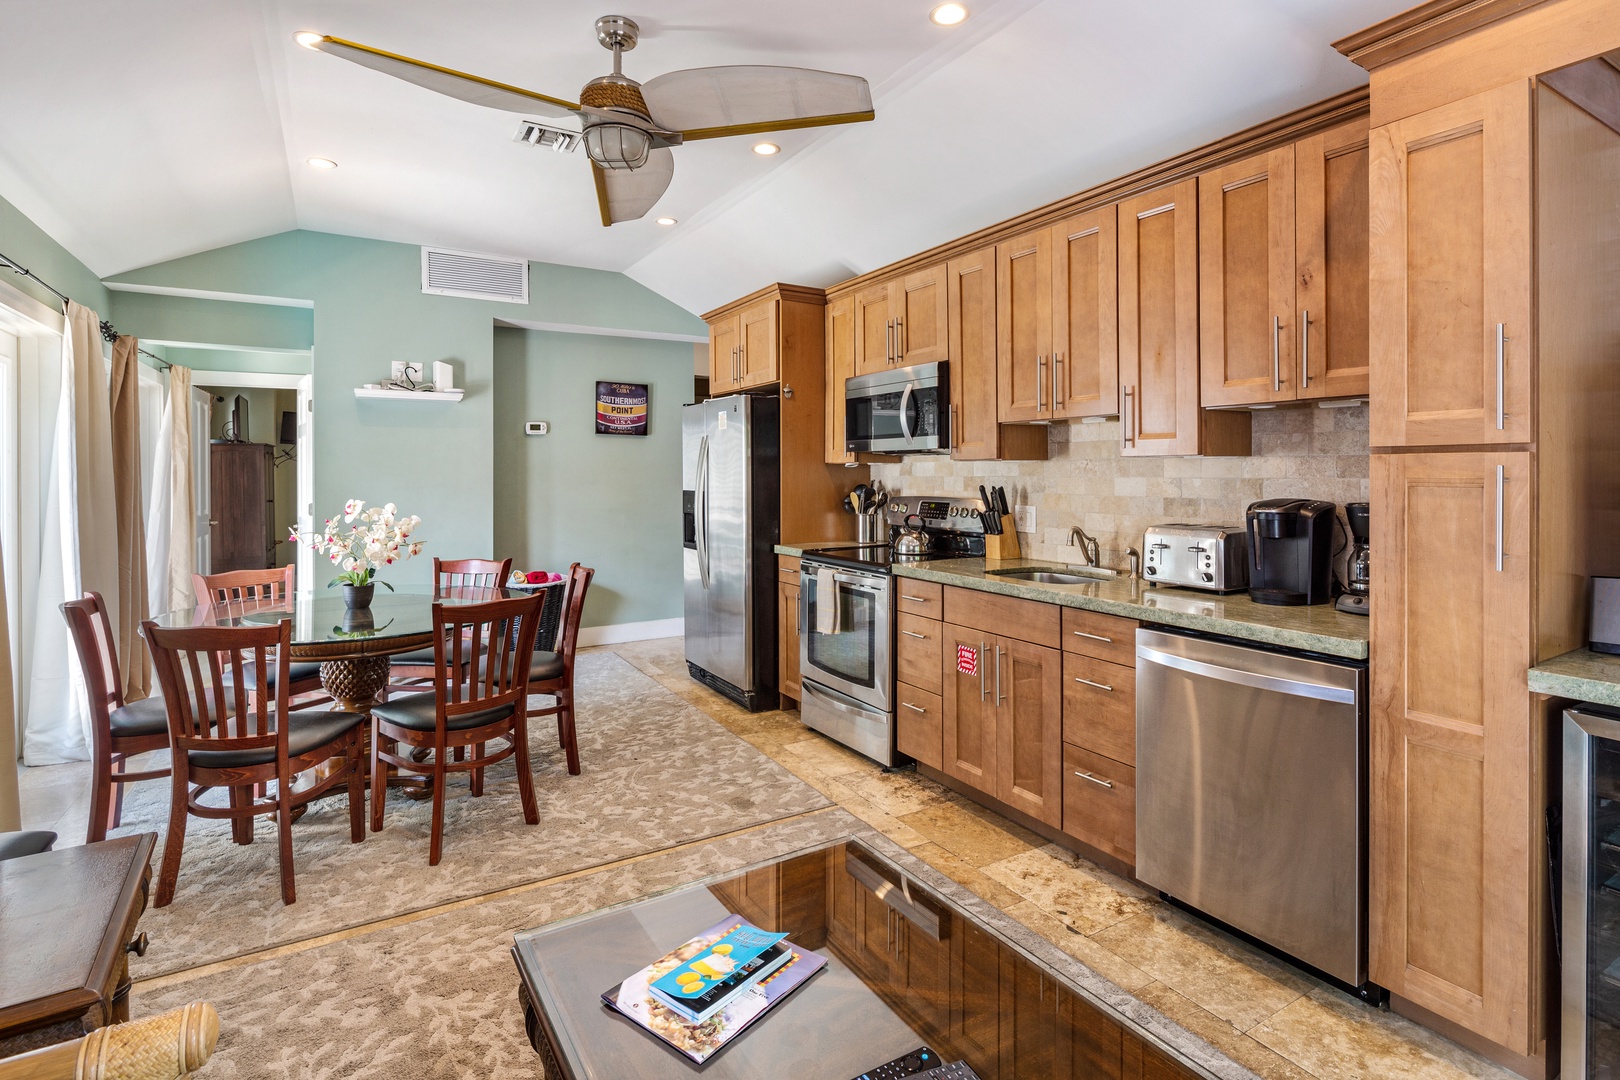 Open Living, Dining and Kitchen Villa @ The Watson House Key West